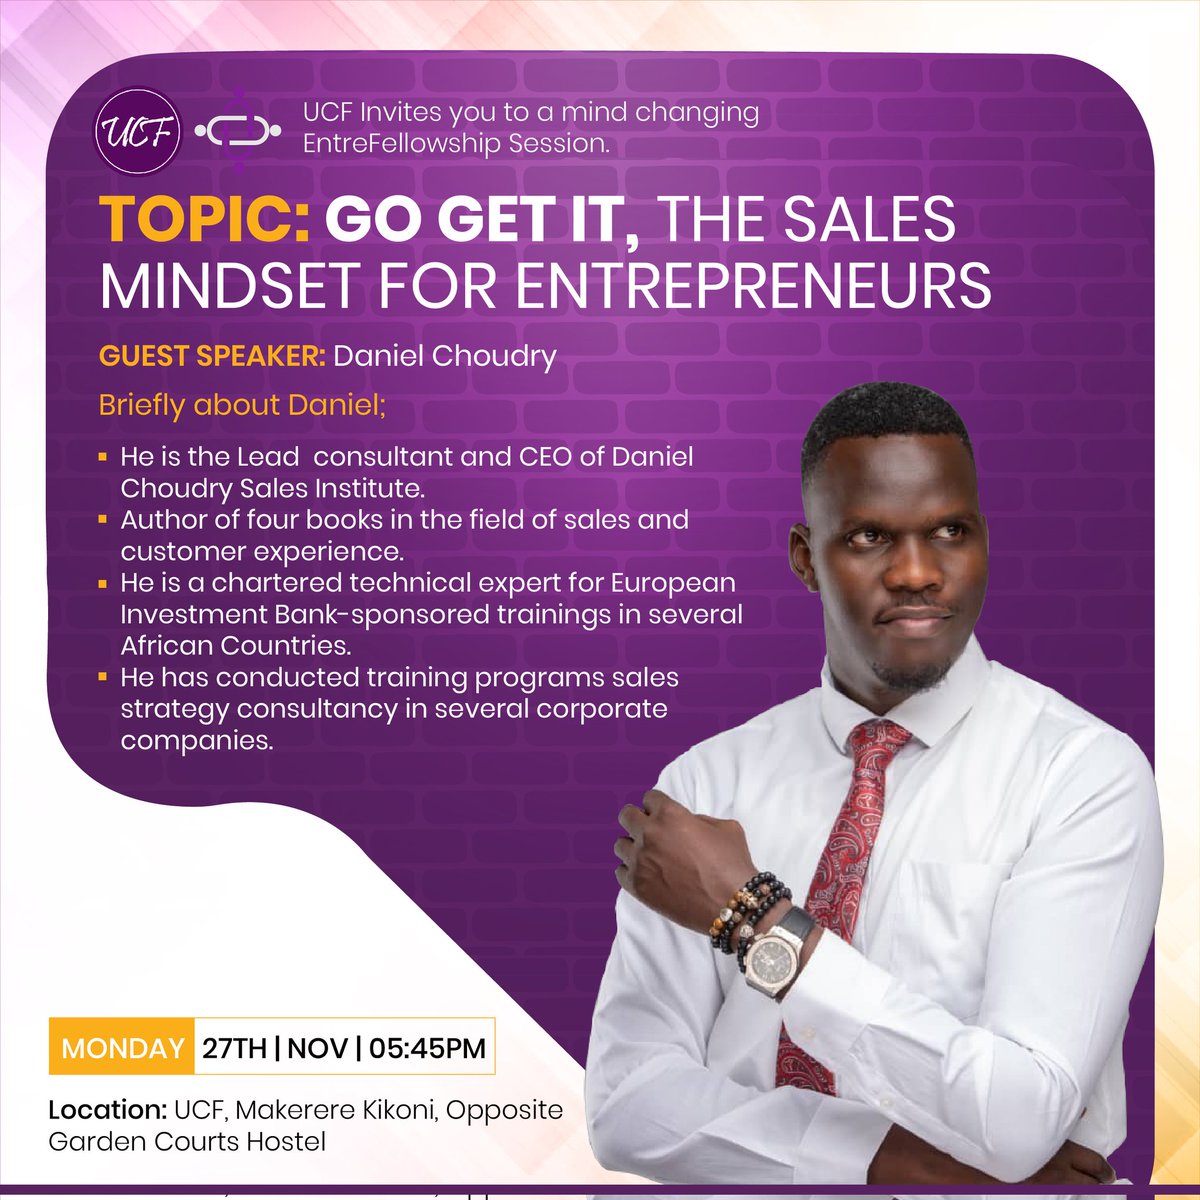 Sales... Sales... Sales... You gotta keep selling if you still want to be relevant in the marketplace. 

How about learning a thing or two from @ChoudryDaniel next Monday at 5:30pm?! 
Cheers!